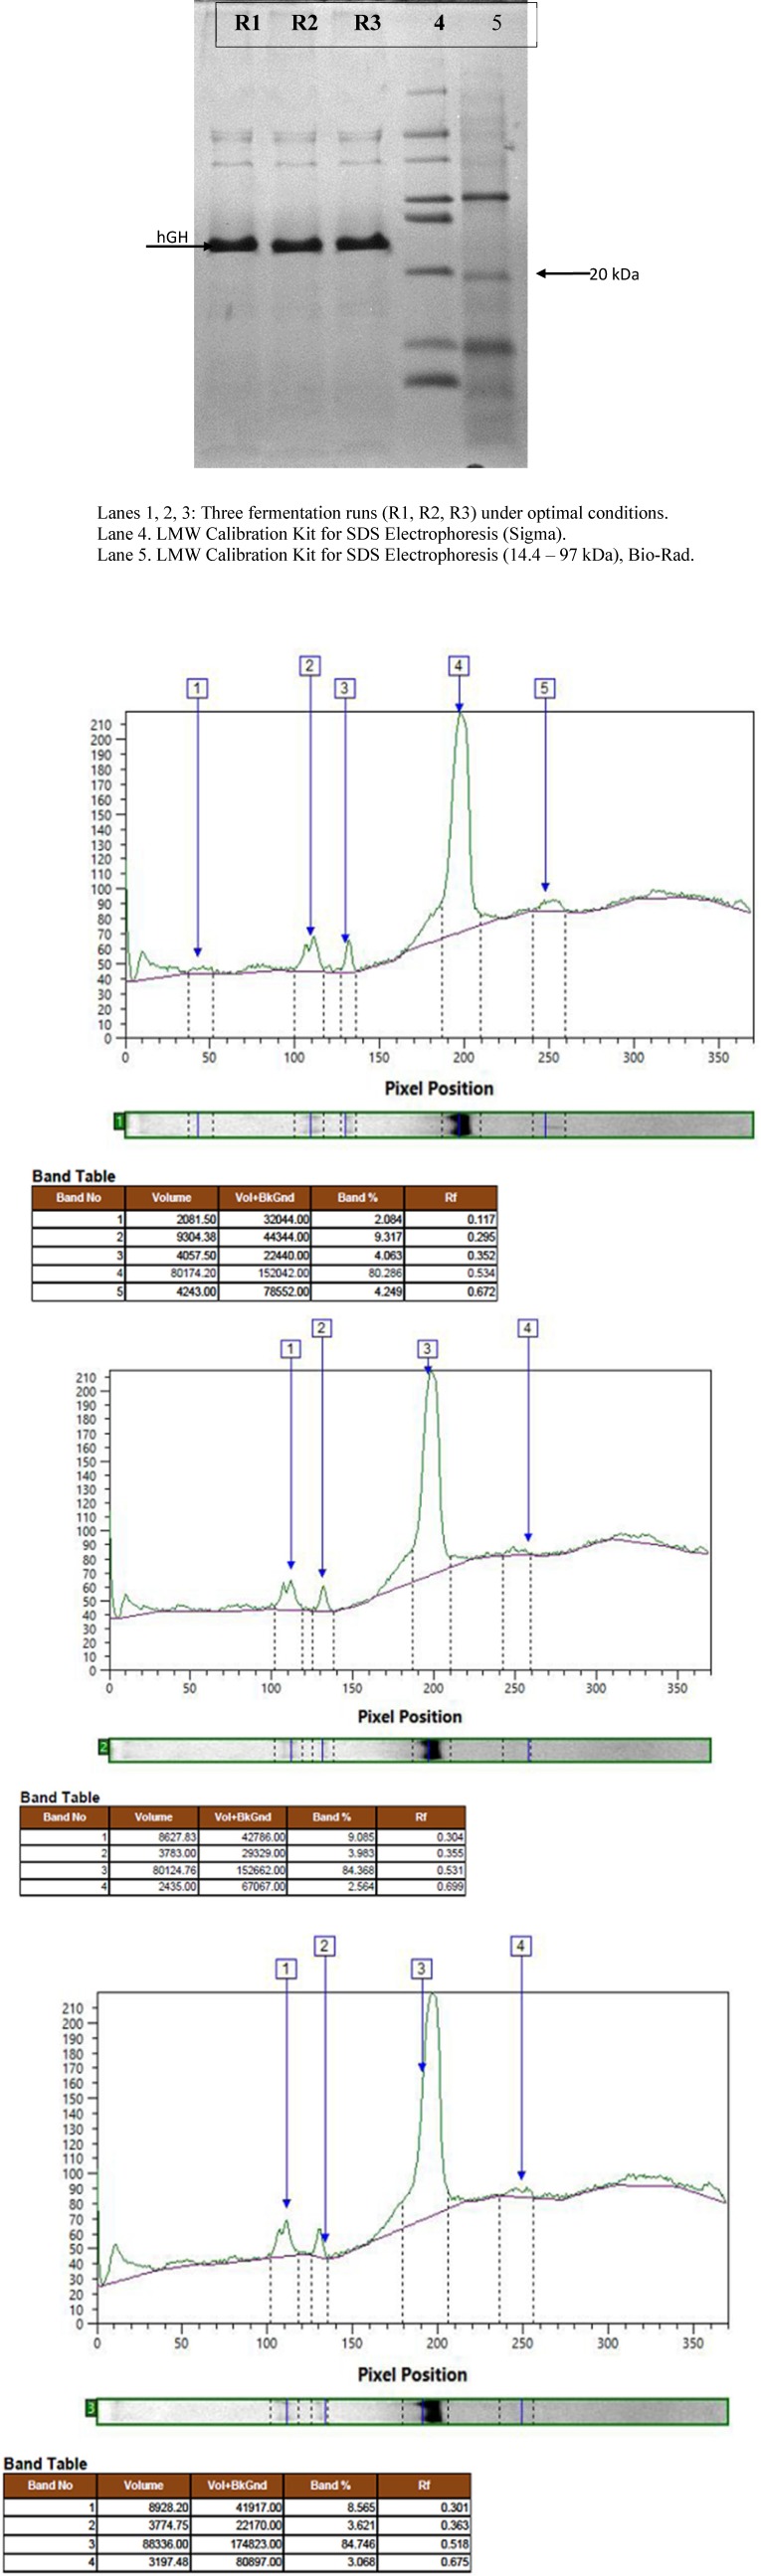 Protein expression and densitometric analysis of three fermentation runs at concentration of 50 g/L